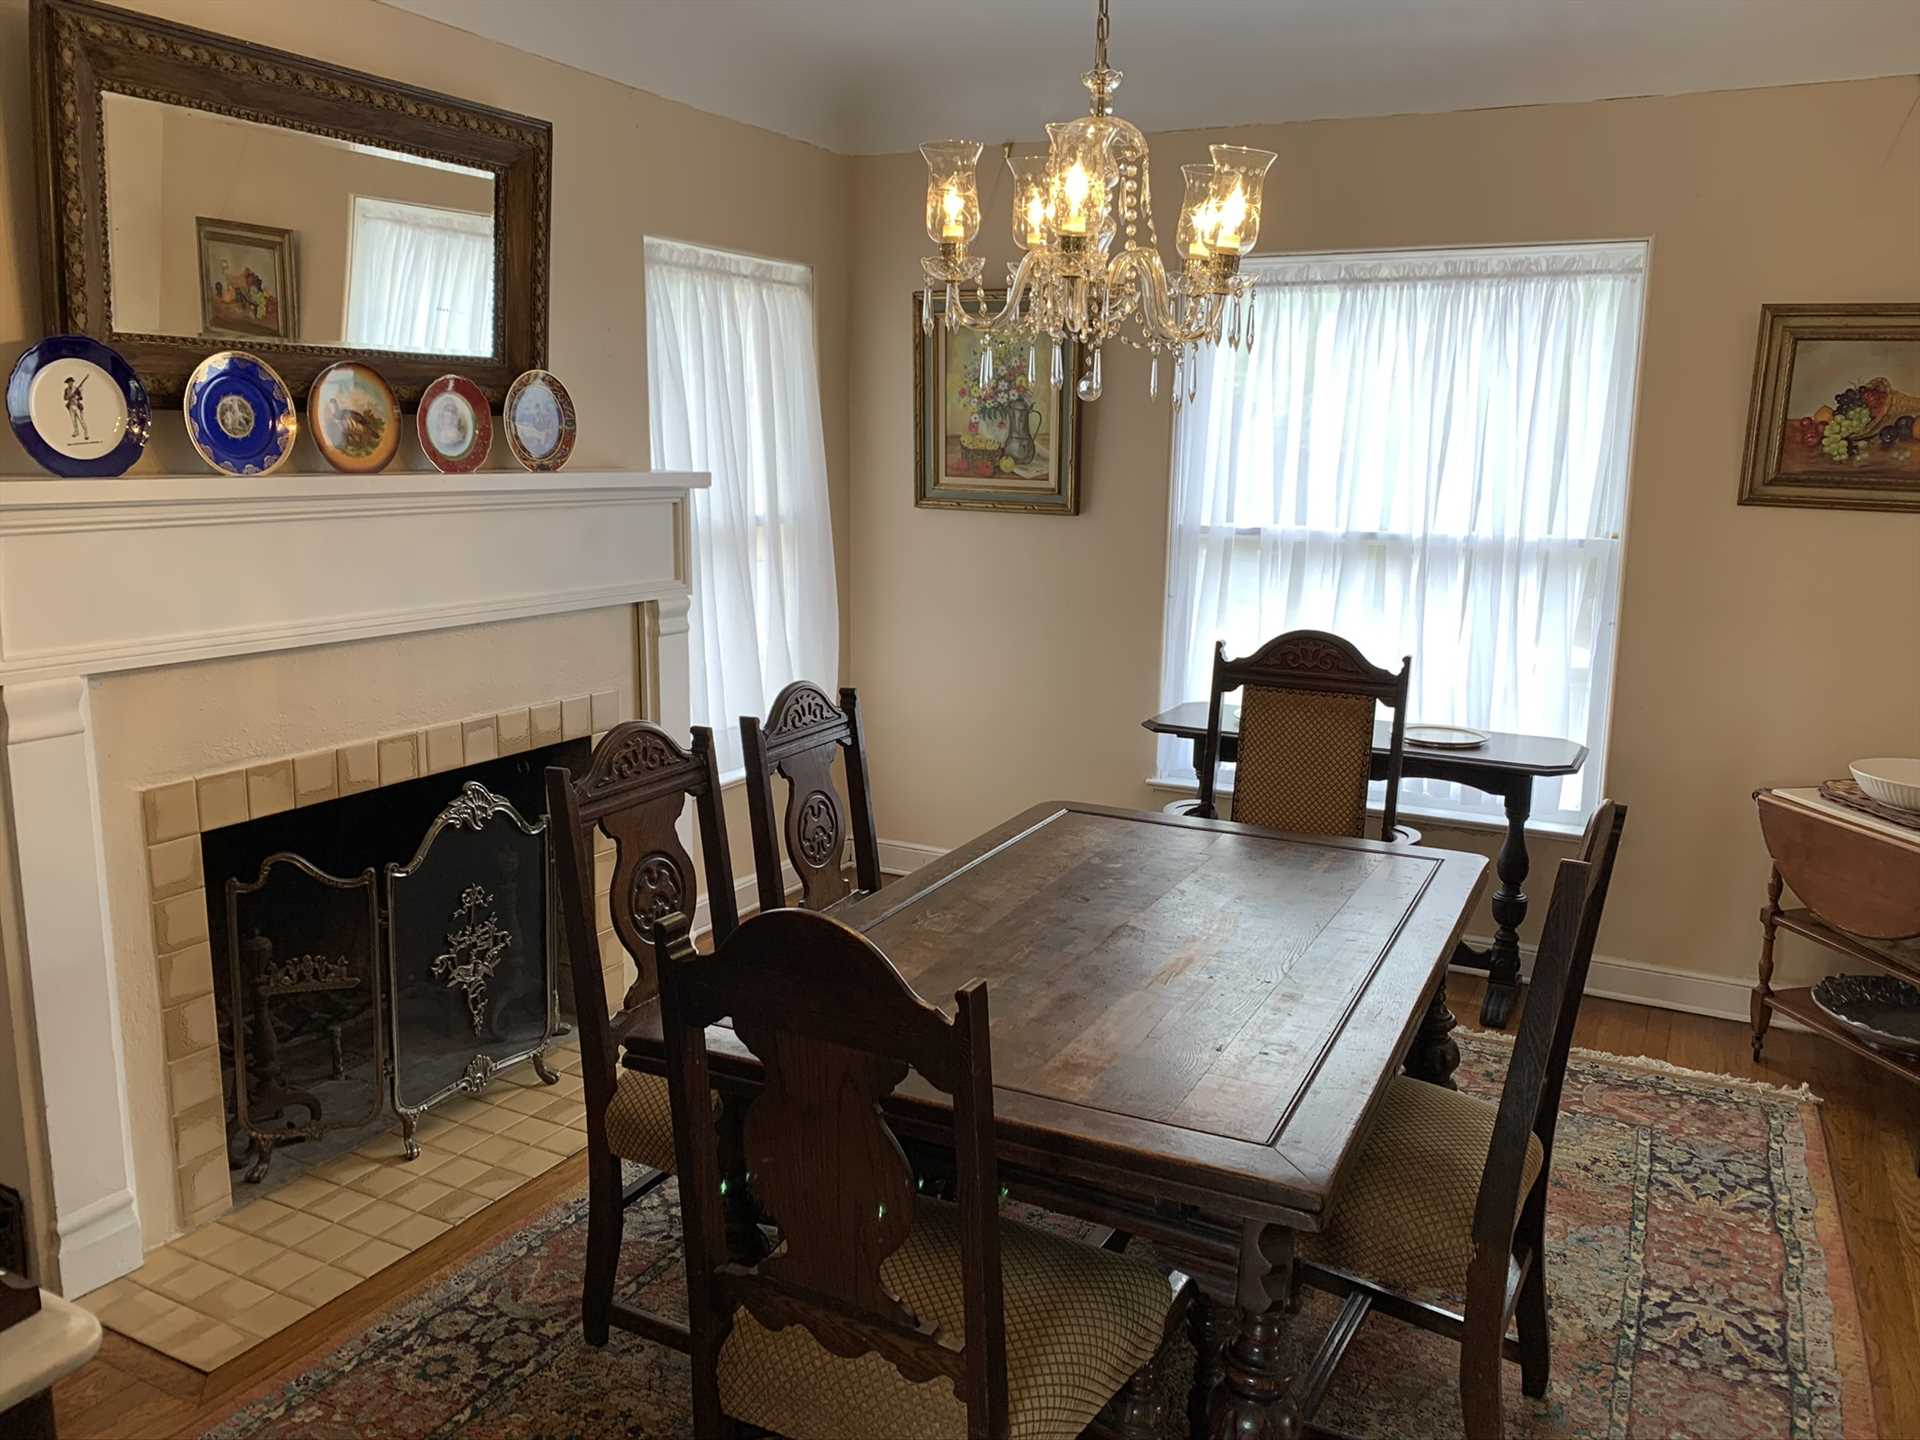                                                 Antique woodwork highlights the dining room, which offers a historic and homey setting for your family feasts.